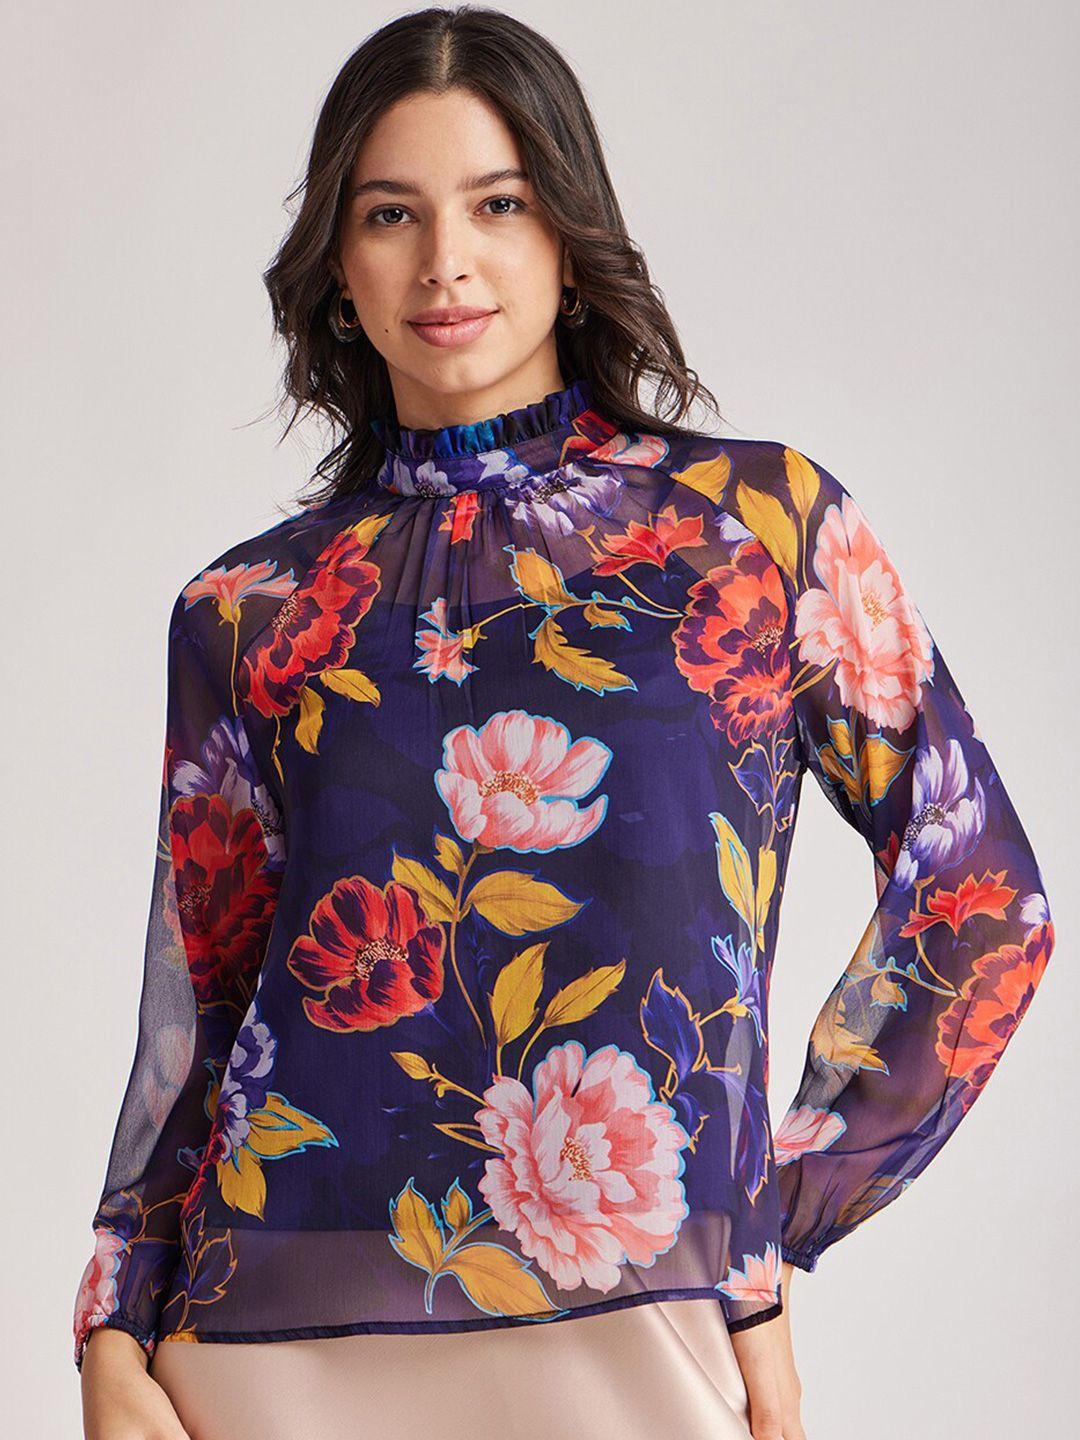 fablestreet floral printed high neck ruffle detail puff sleeves chiffon top